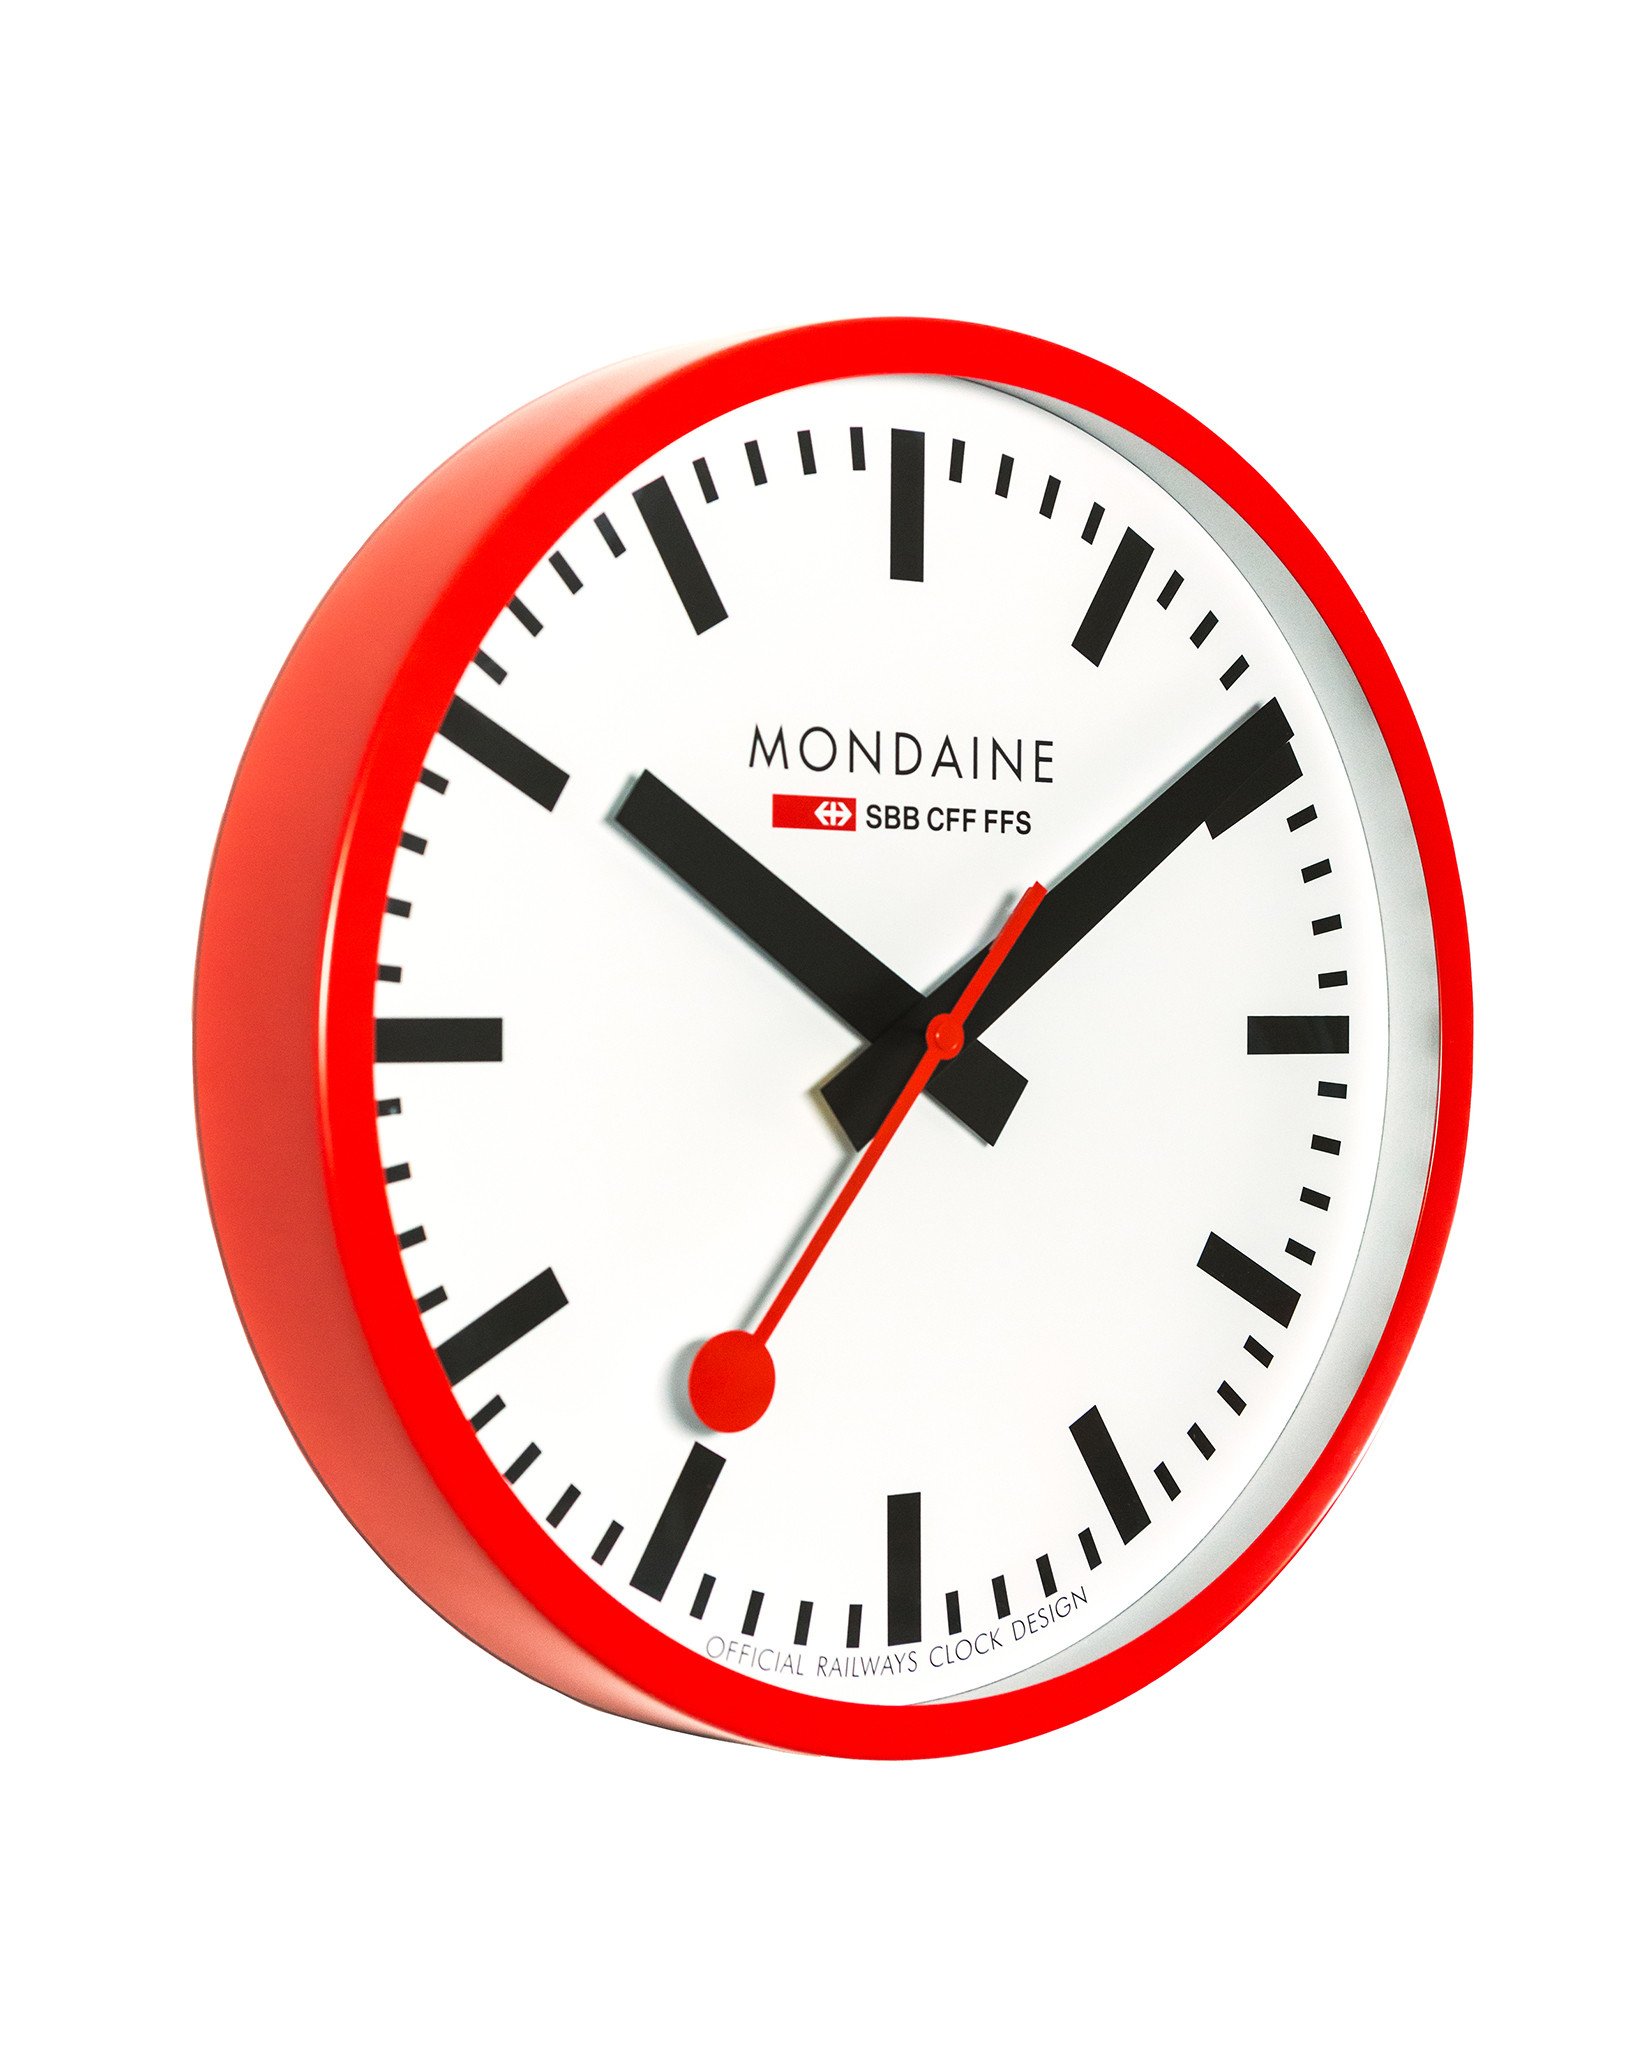 The Mondaine Official Swiss Railways watch store. All styles available.